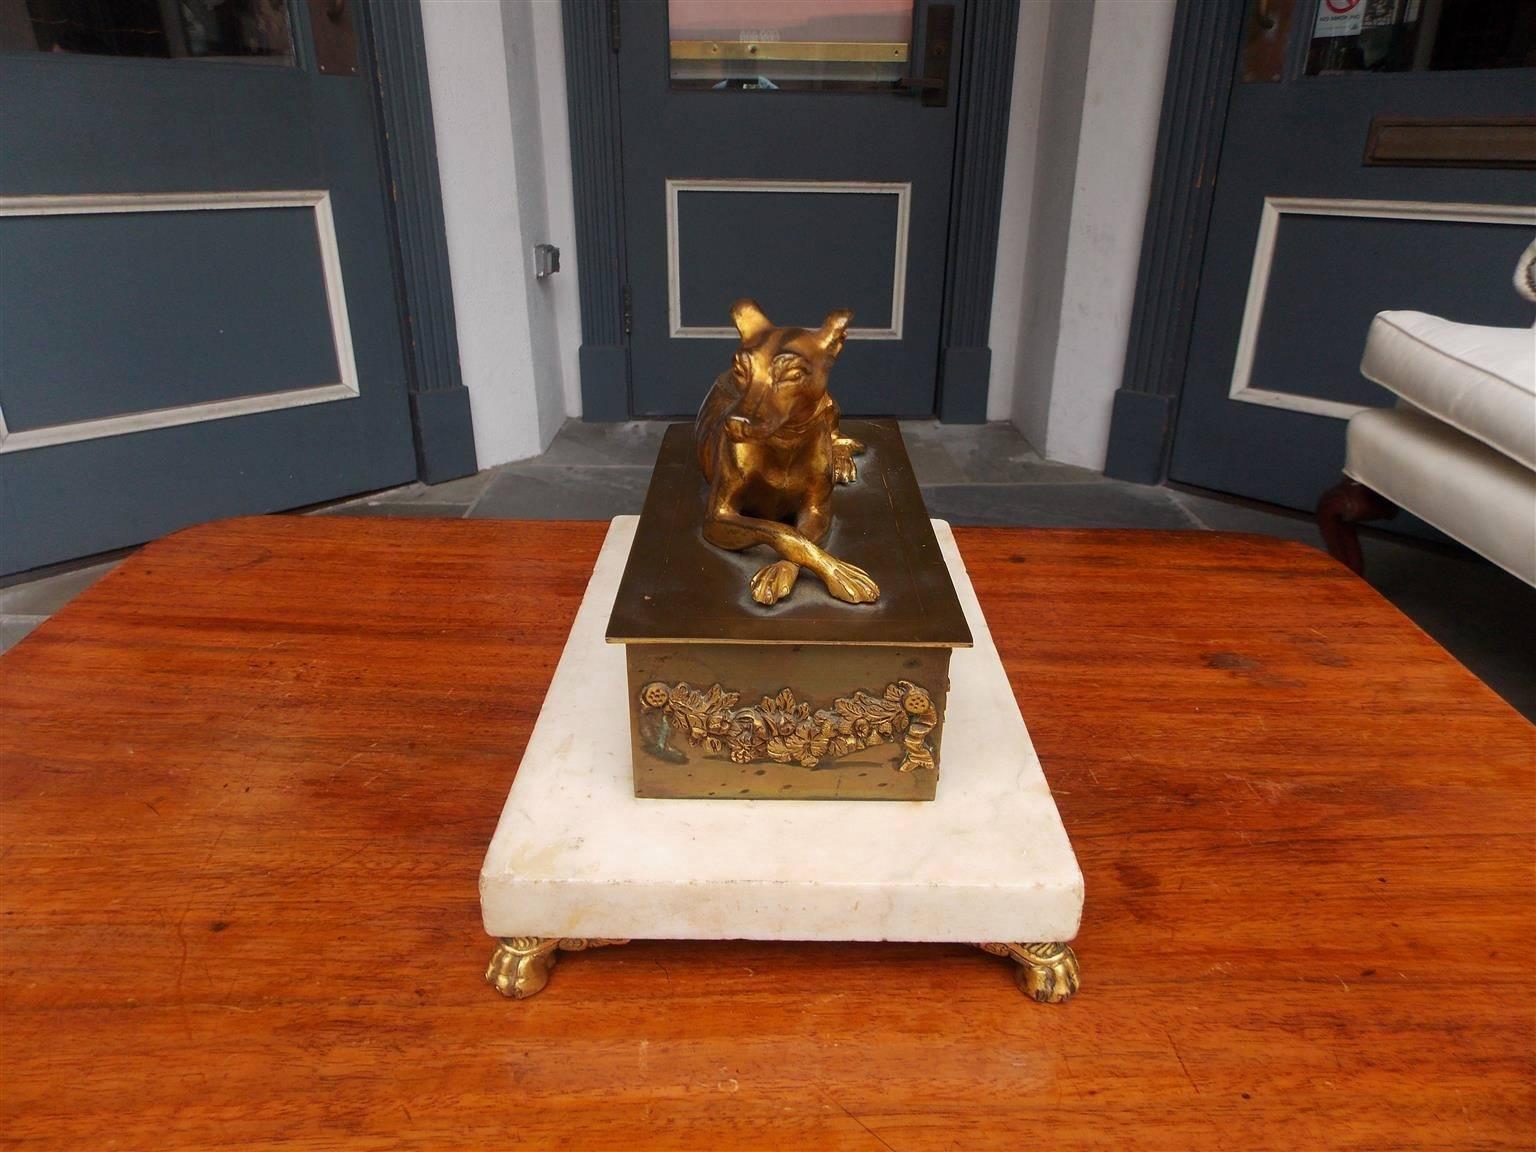 English Regency bronze ormolu whippet inkwell with flanking figural canines, floral swag motif, and resting on rectangular marble base with the original ormolu lions paw feet, Early 19th century.